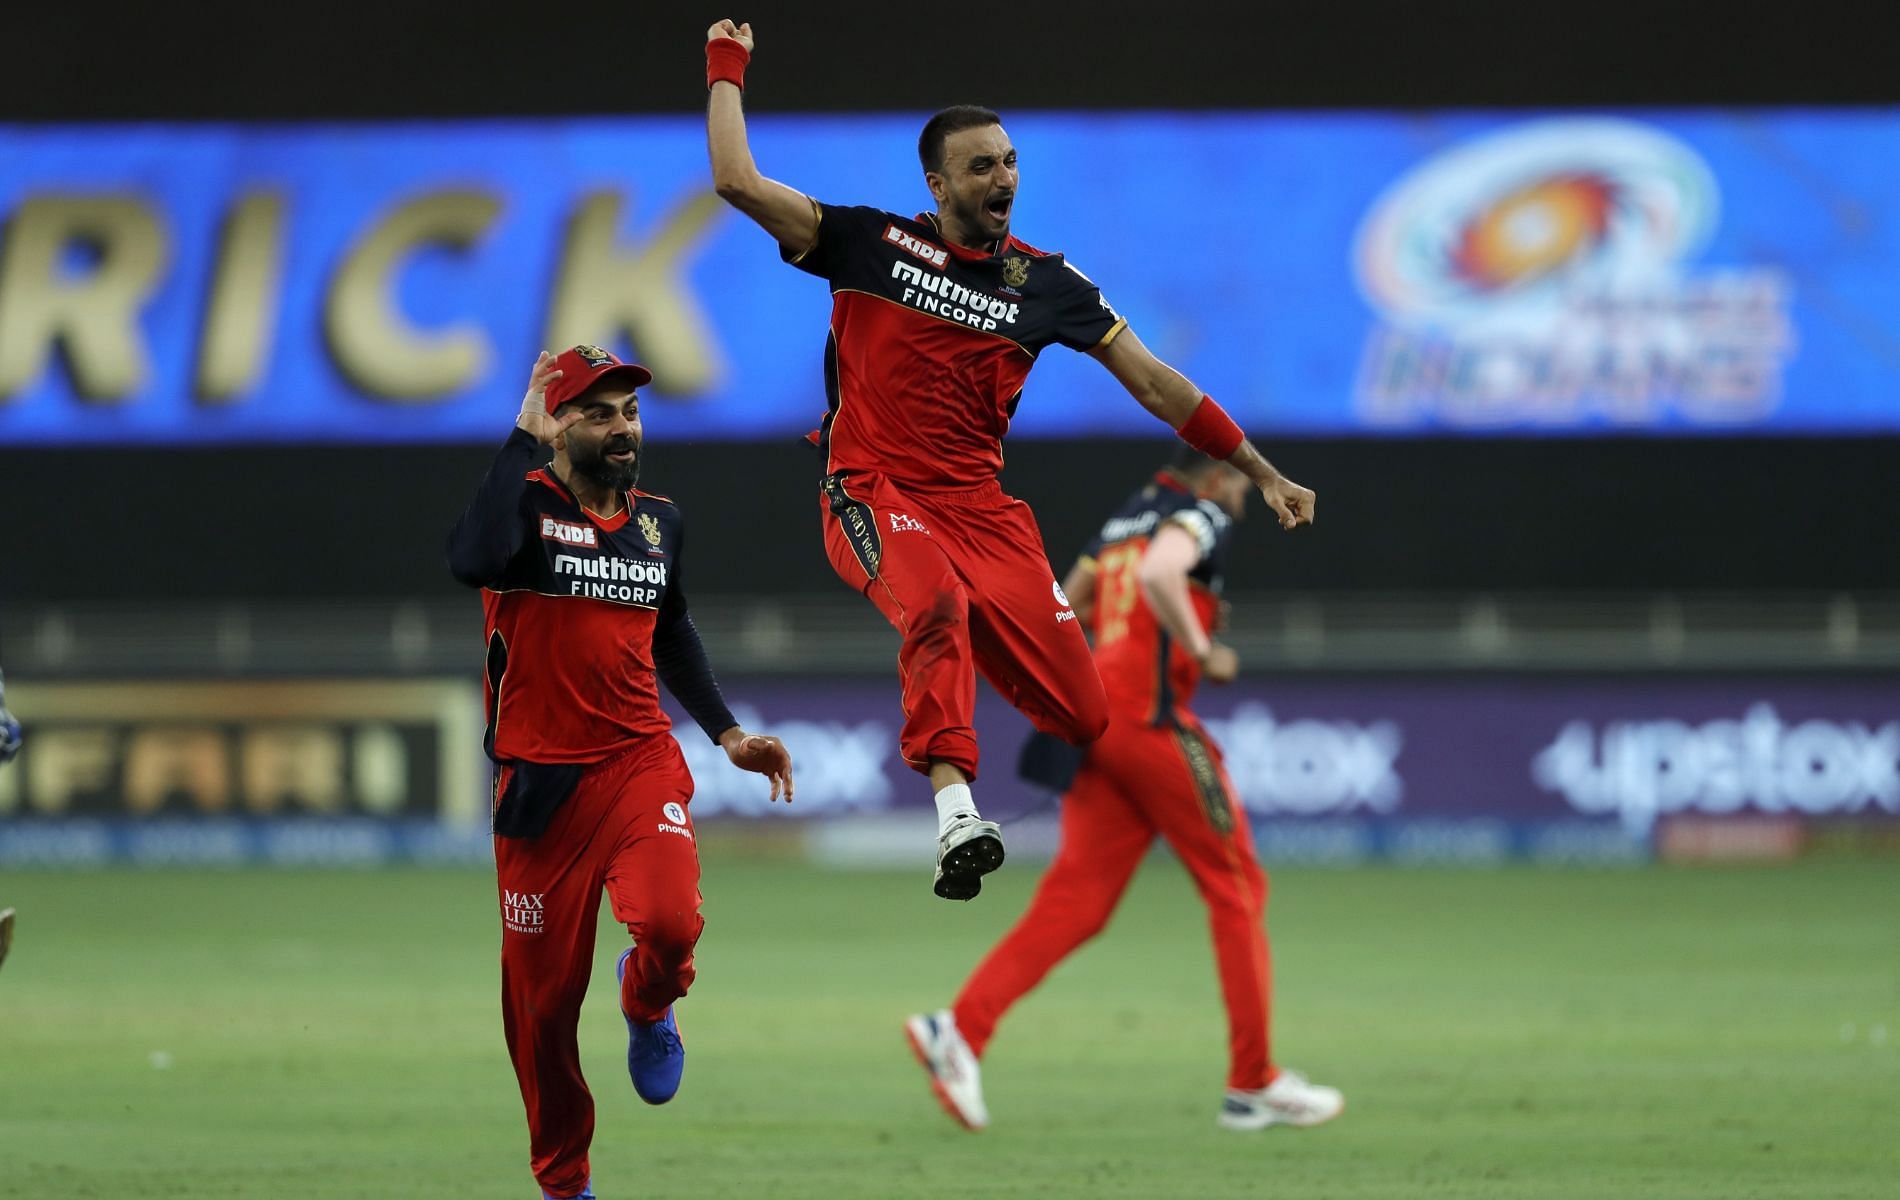 Harshal Patel was the highest wicket-taker in IPL 2021.